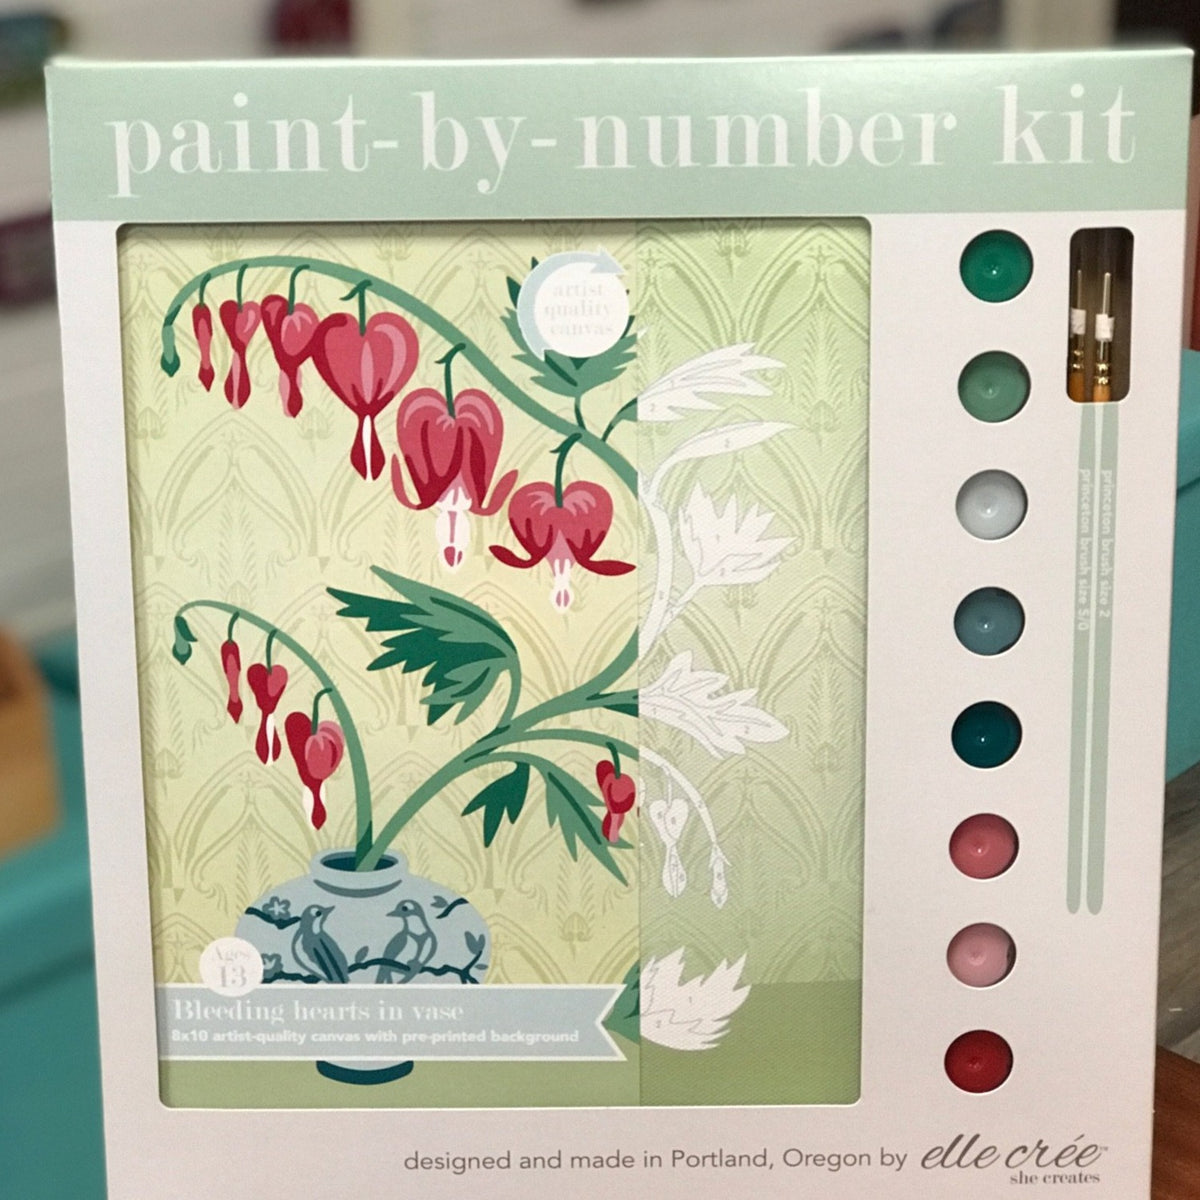 Paint by number kit package with image of bleeding hearts plant on the left and paint colors on the right. The flowers look like hearts and a stem of them are in a blue vase with birds on itl